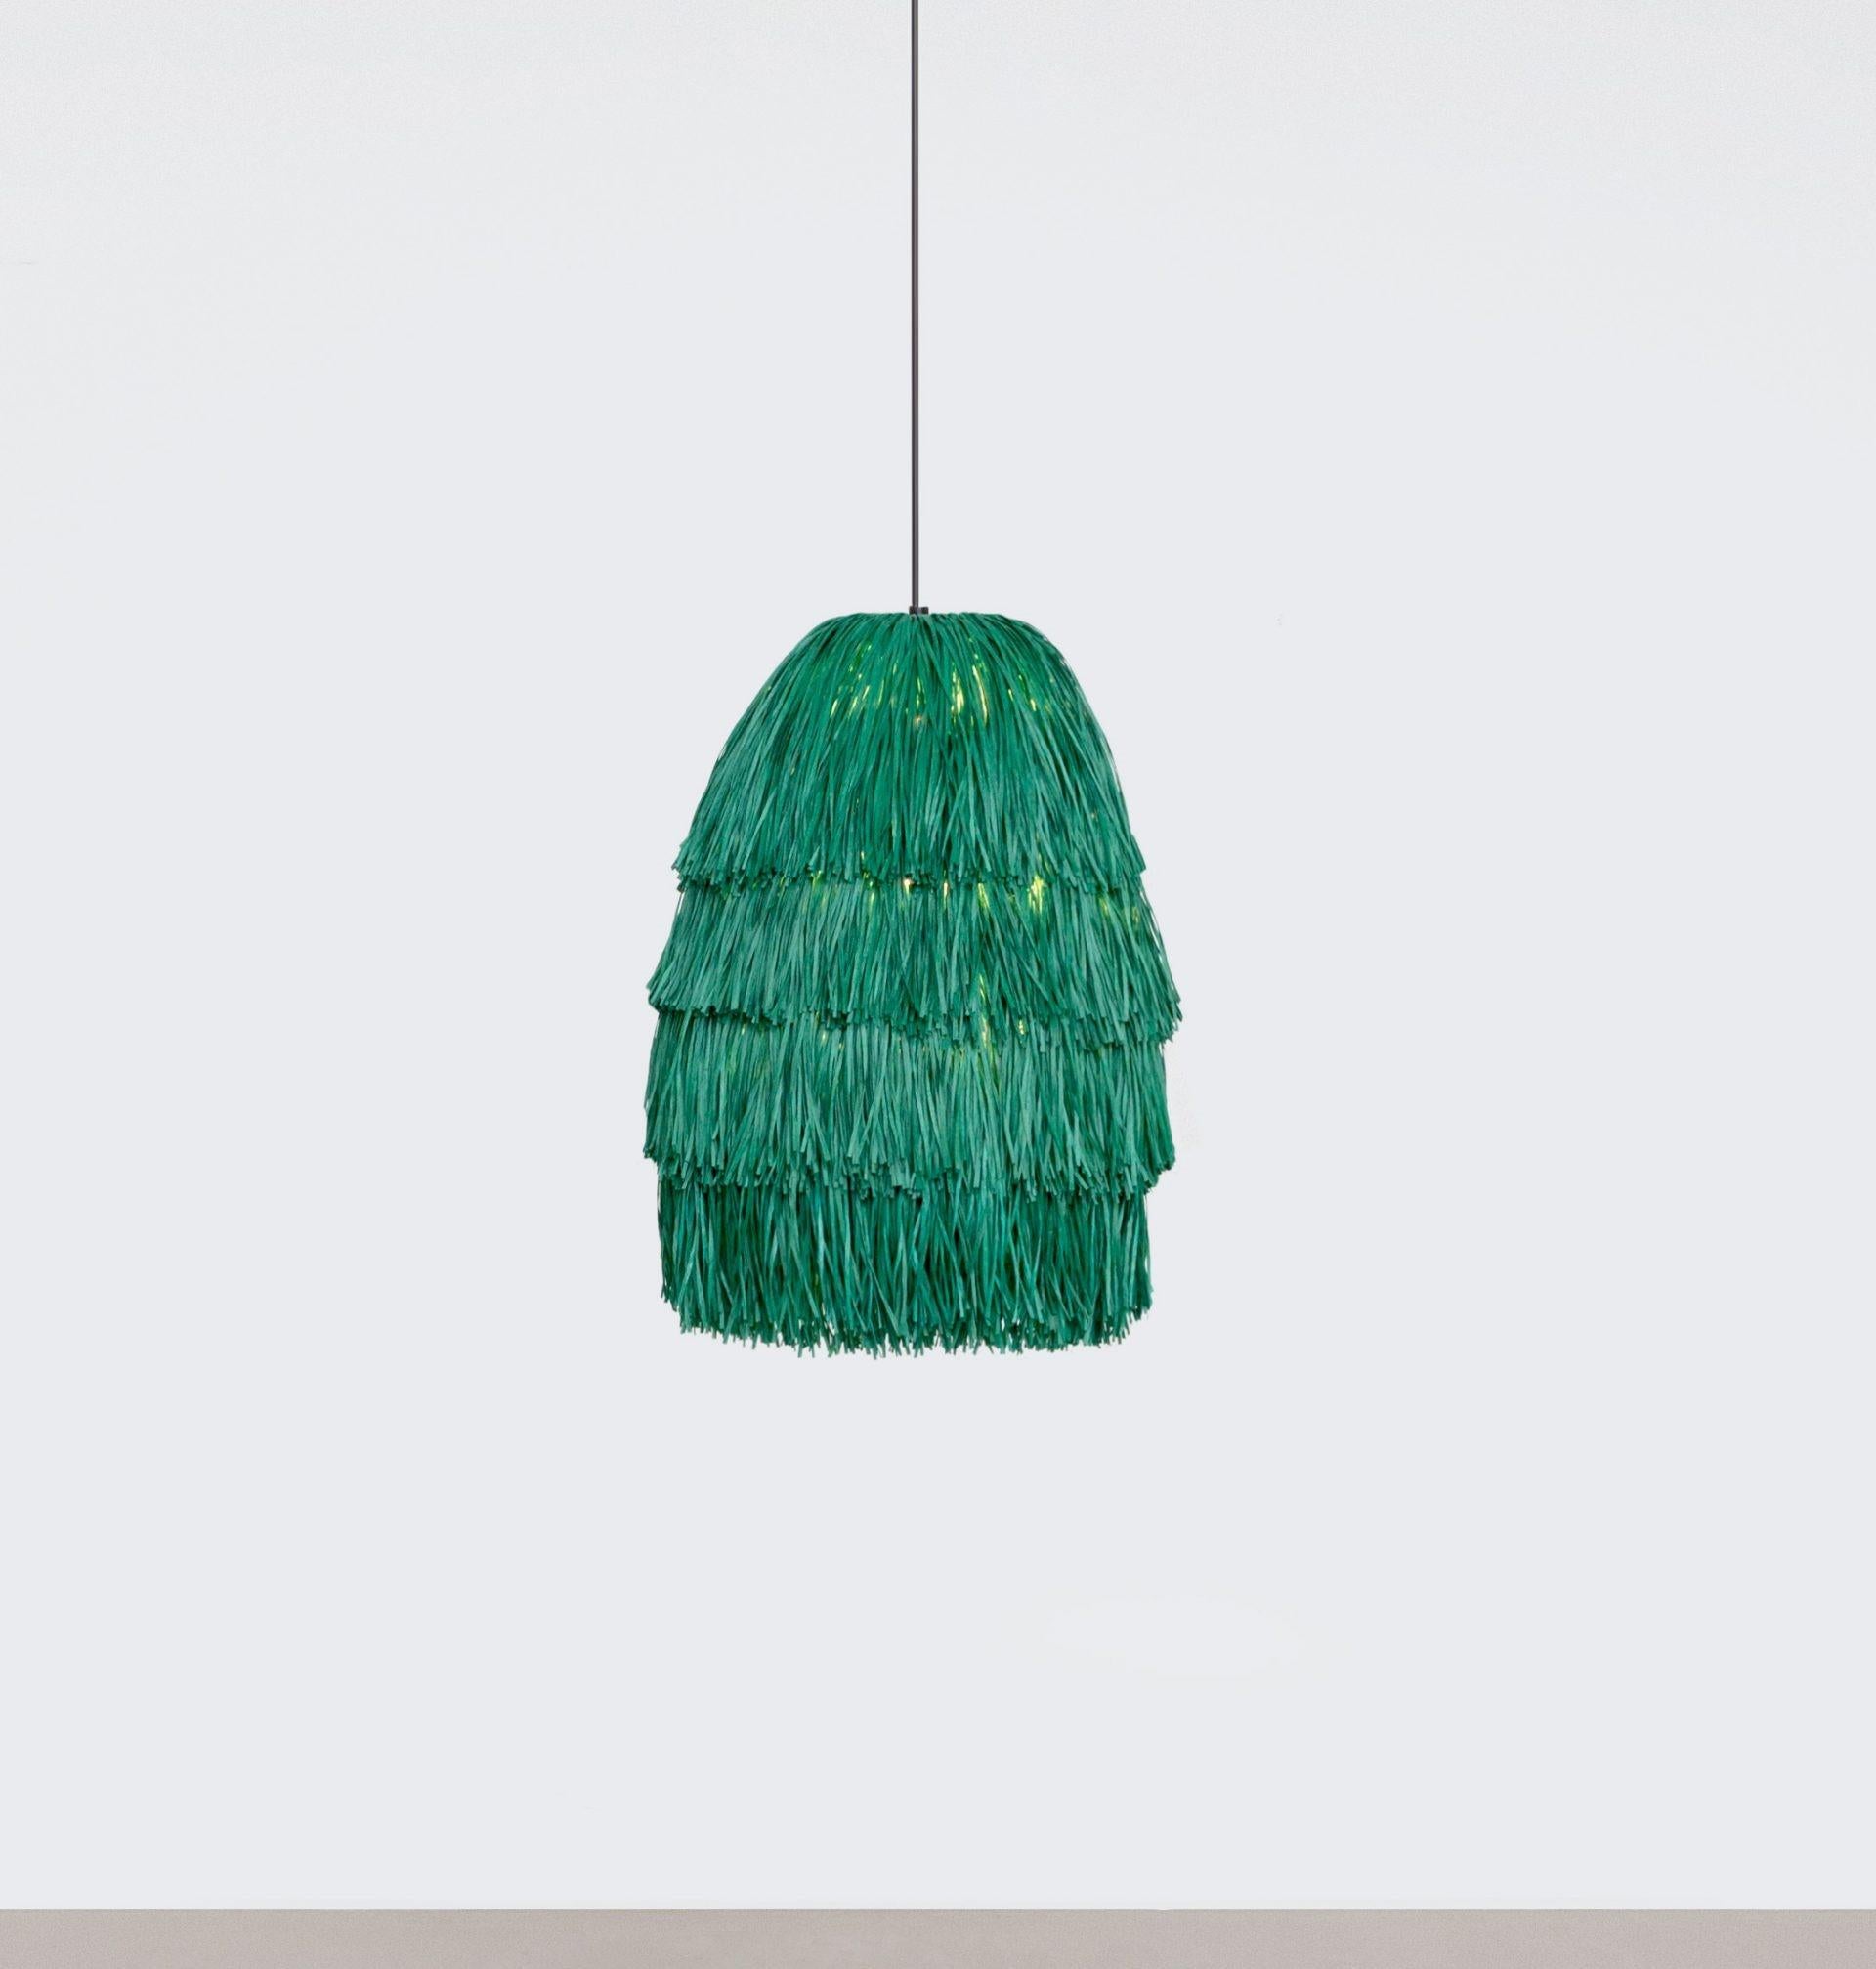 Green Fran M lamp by Llot Llov
Handcrafted Light Object
Dimensions: Ø 45 cm x H 65 cm
Materials: raffia fringes
Also available in green, red, black, beige 

With their bulky silhouette and rustling fringes, the FRAN lights are reminiscent of a